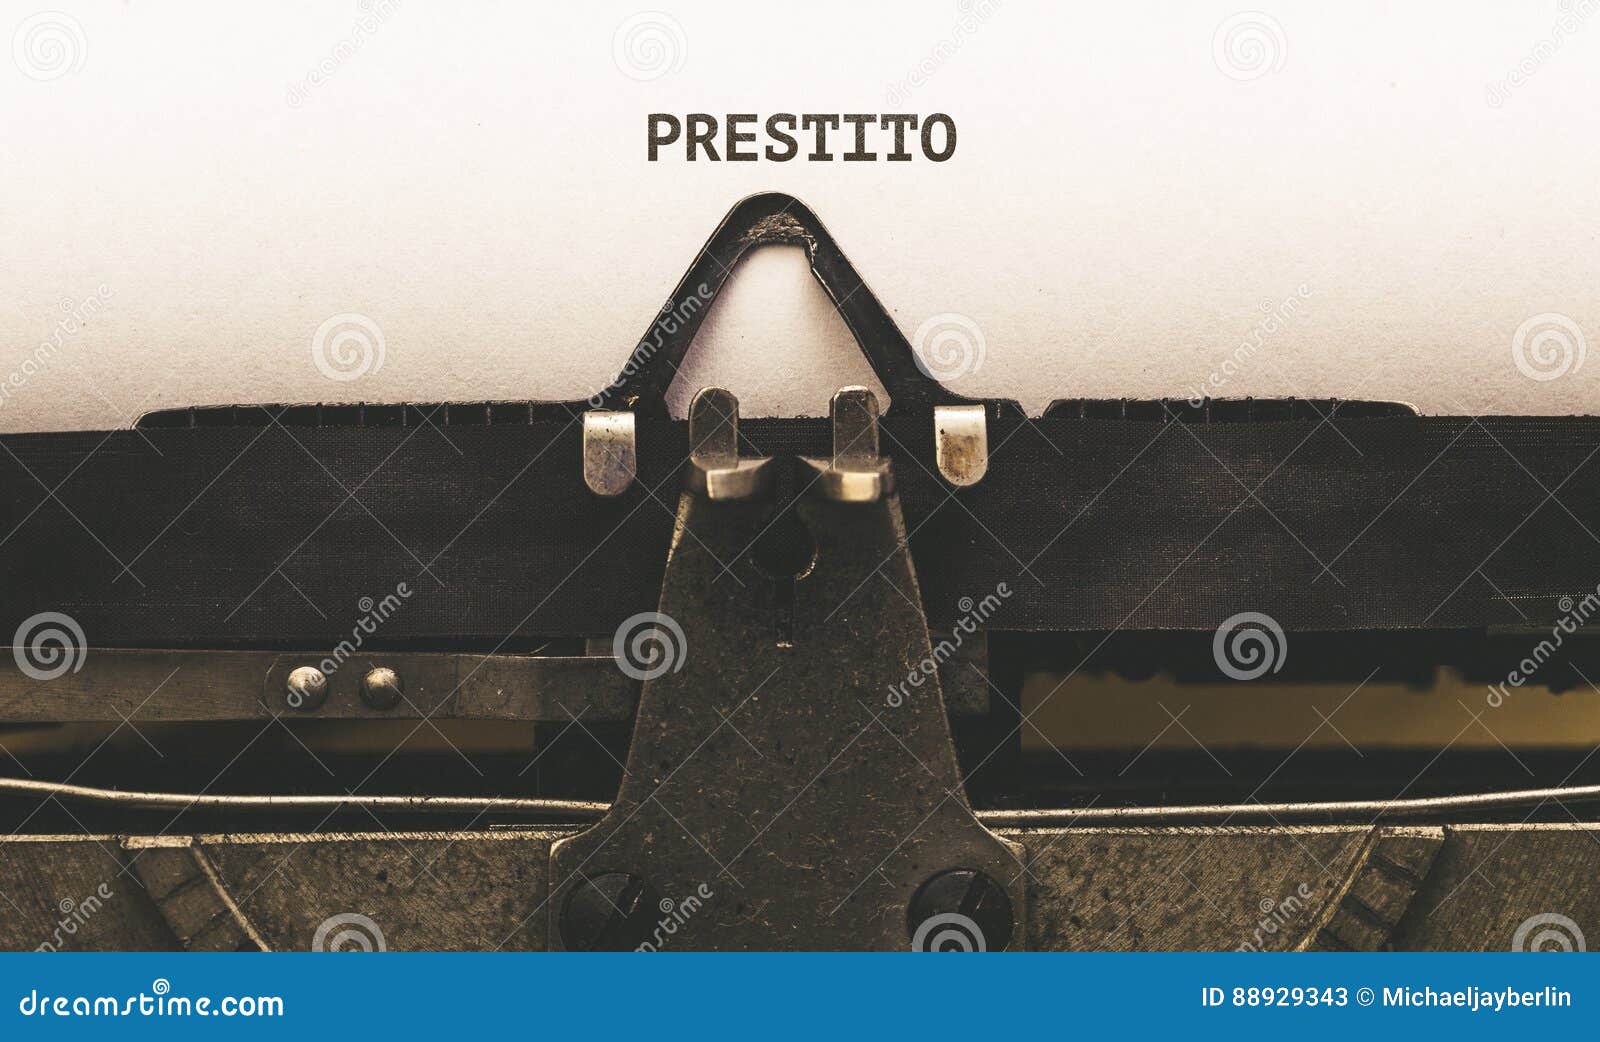 prestito, italian text for loan on vintage type writer from 1920s